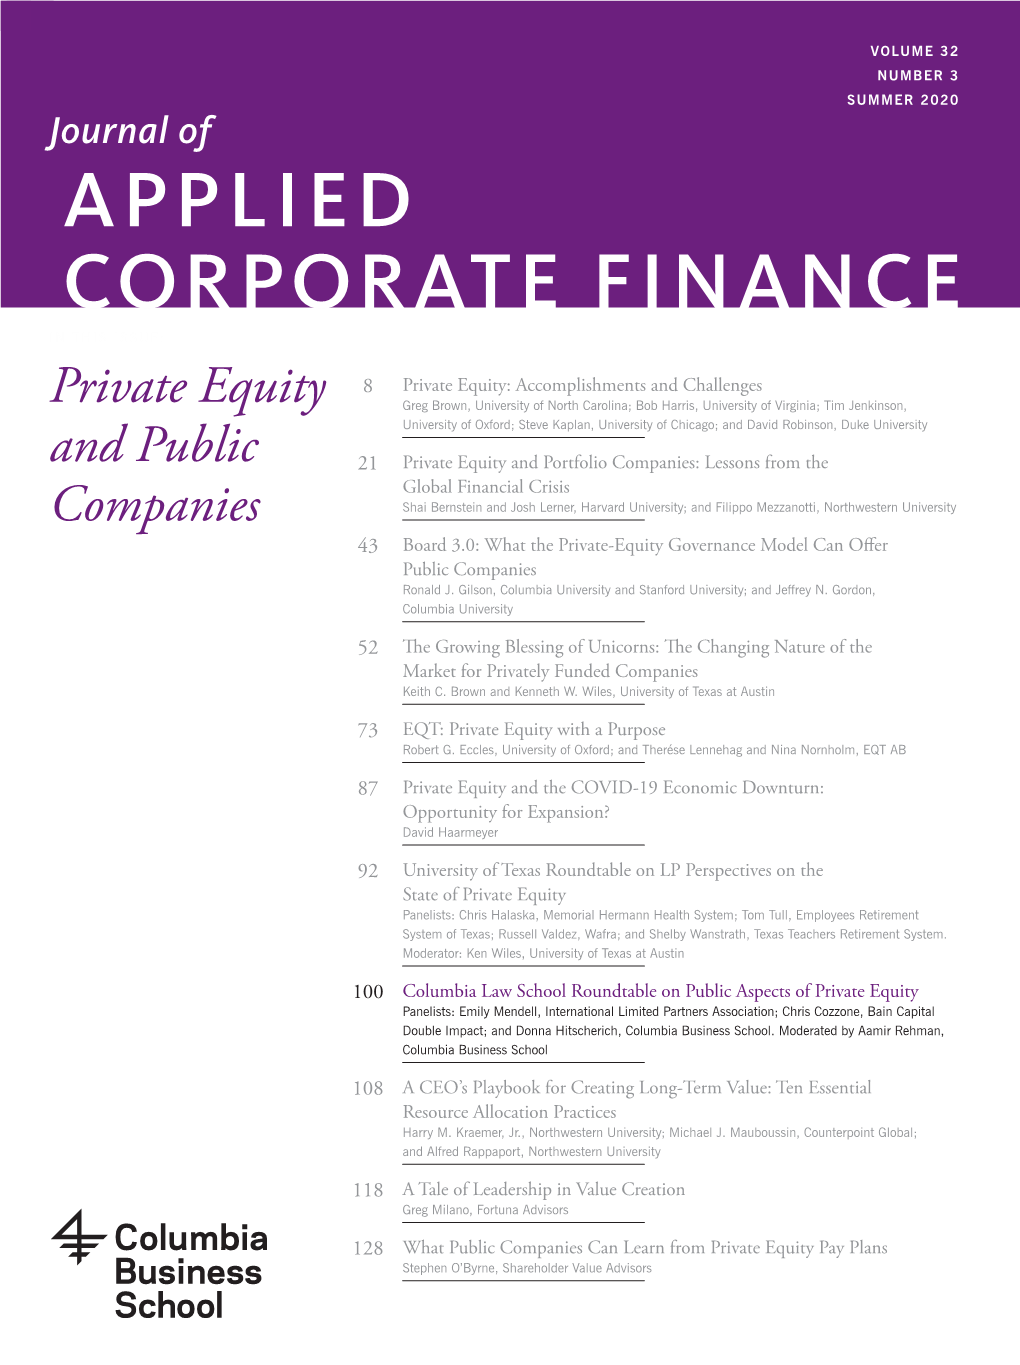 Journal of APPLIED CORPORATE FINANCE in THIS ISSUE